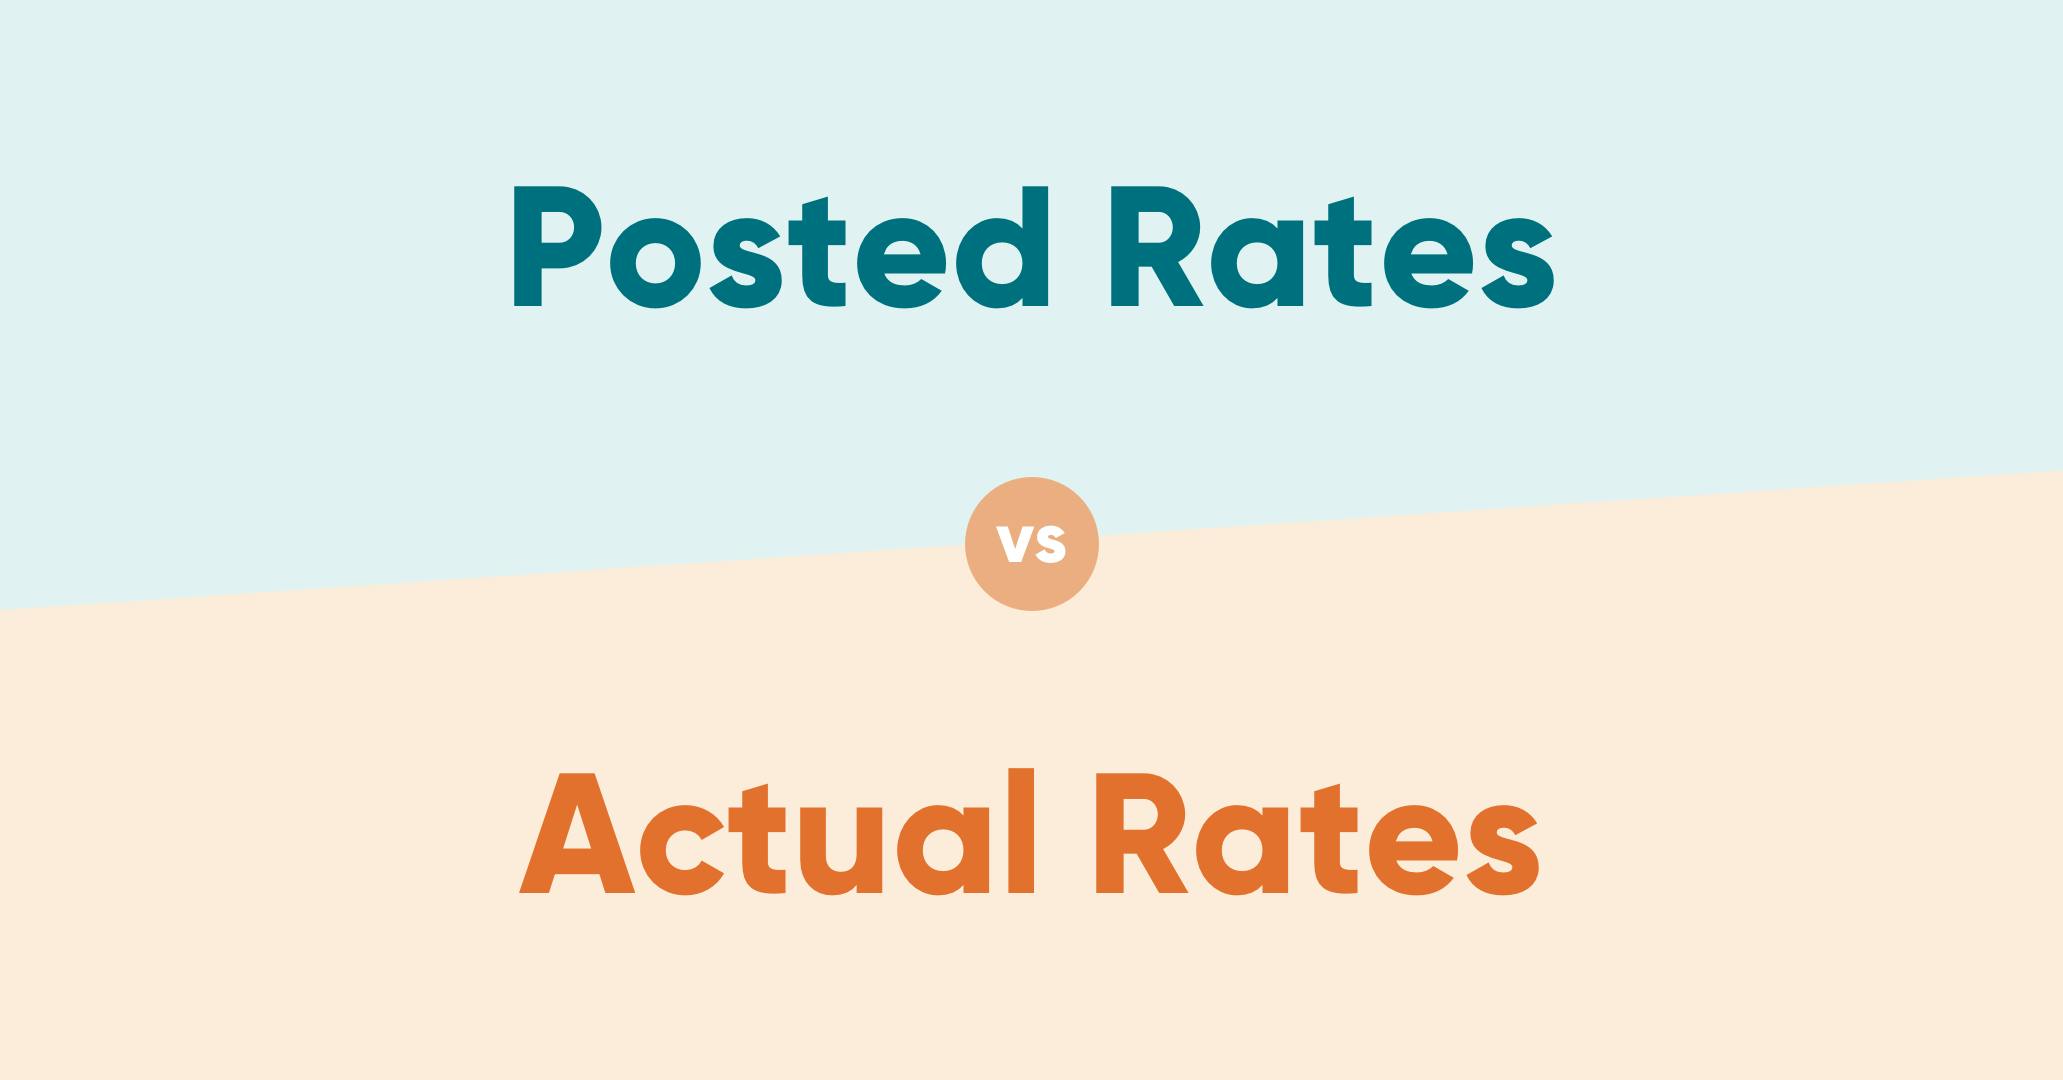 Posted Rates vs Actual Rates